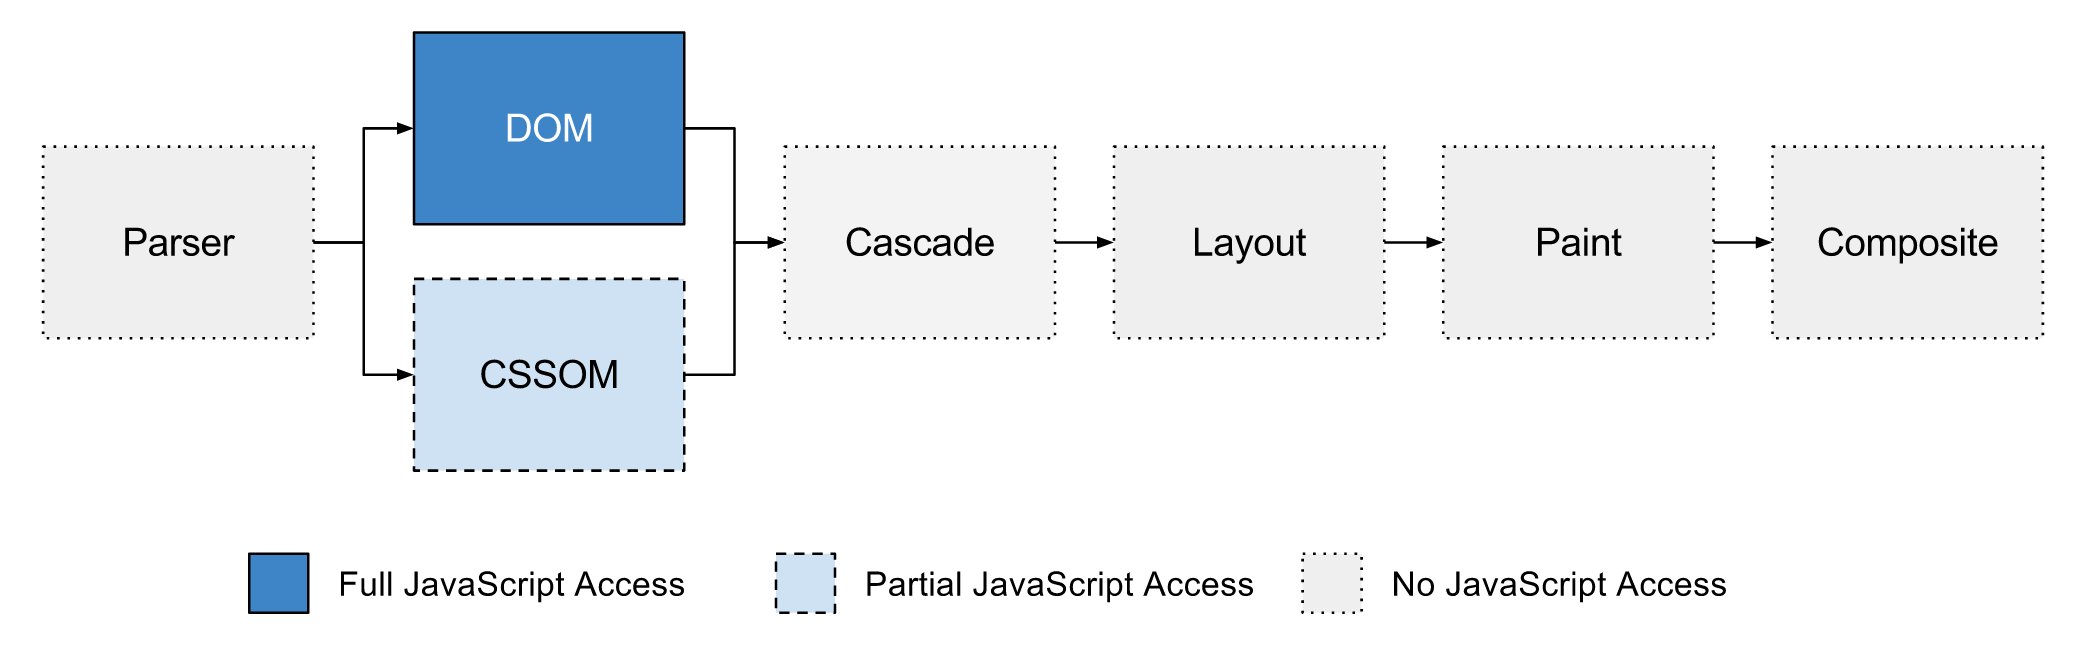 Browser rendering diagram displaying the DOM with full JavaScript access and the CSSOM with partial JavaScript access.